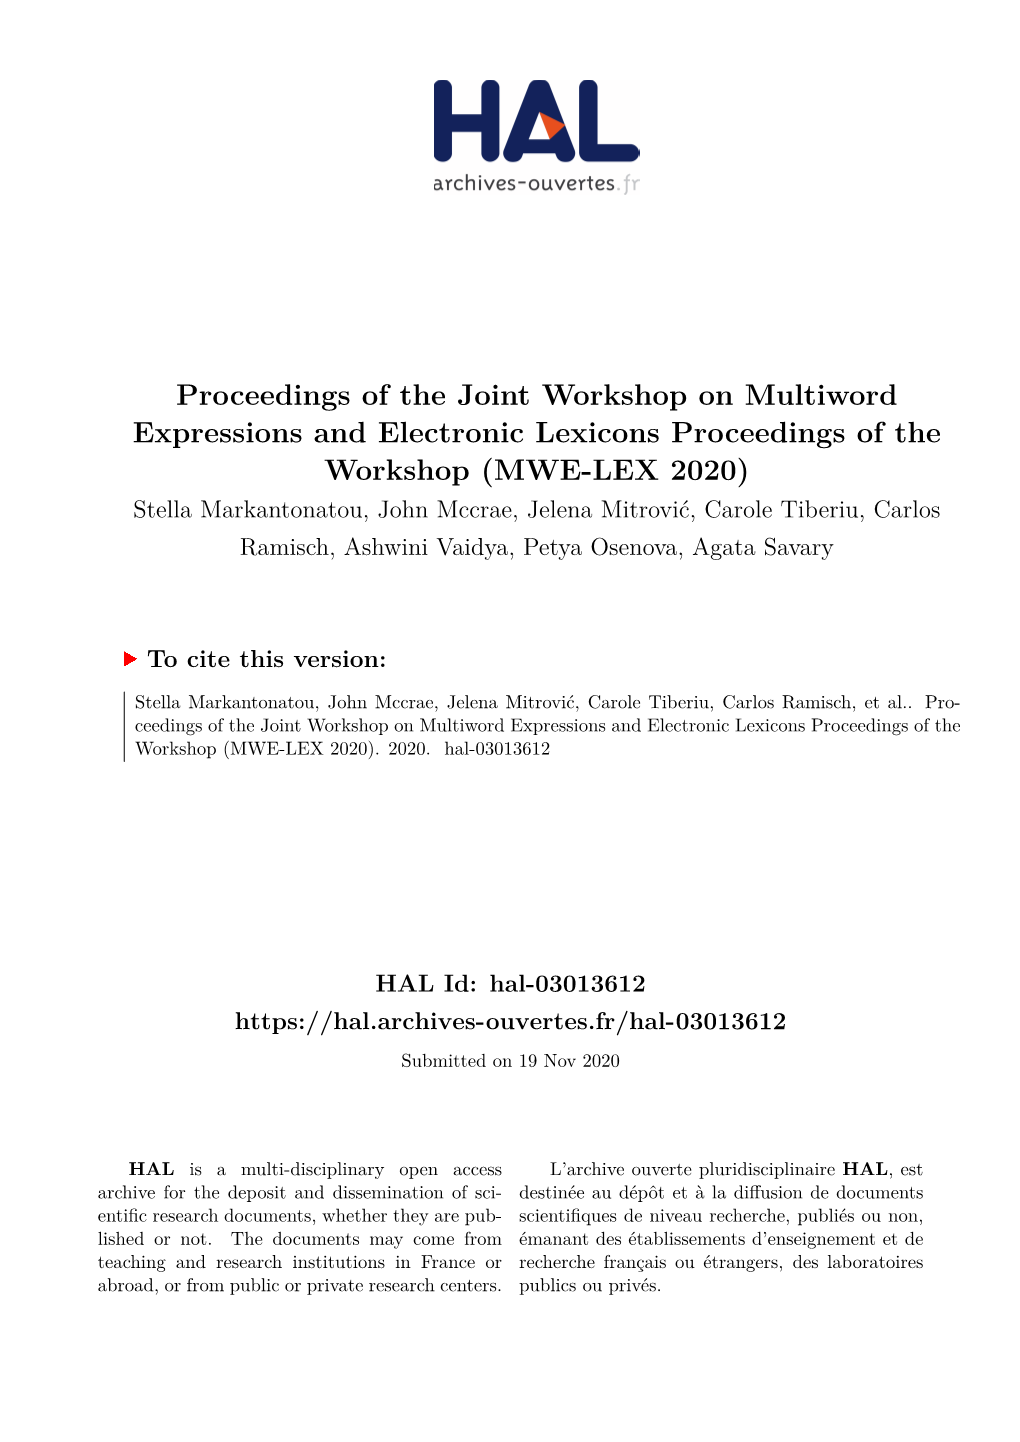 Proceedings of the Joint Workshop on Multiword Expressions and Electronic Lexicons Proceedings of the Workshop (MWE-LEX 2020)